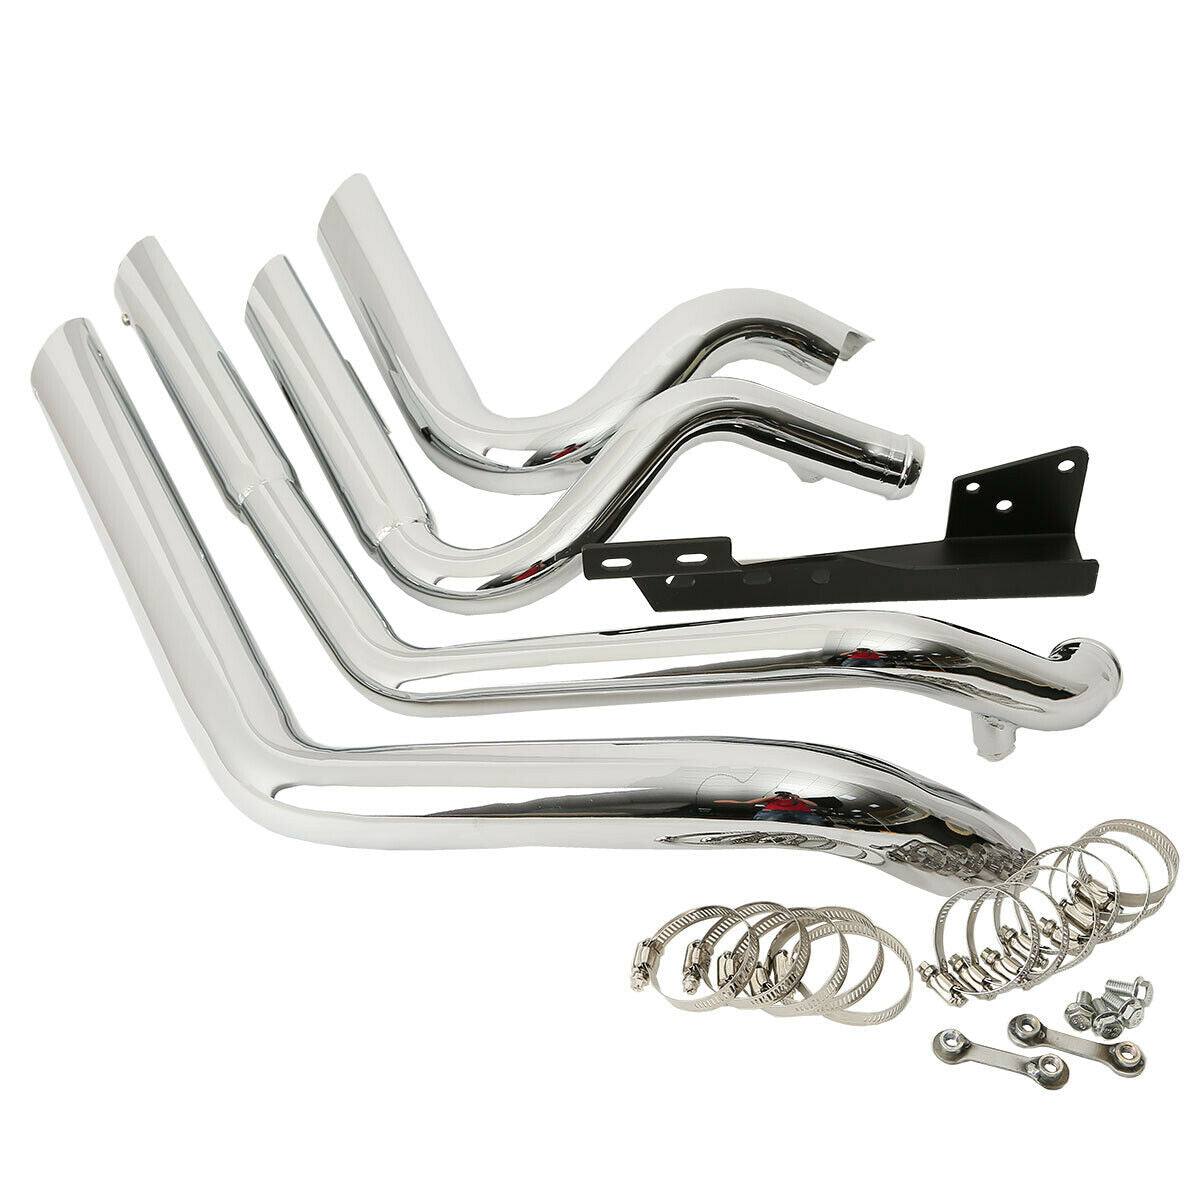 Staggered Shortshot Exhaust Pipes Fit For Harley Sportster 883 1200 48 72 04-13 - Moto Life Products